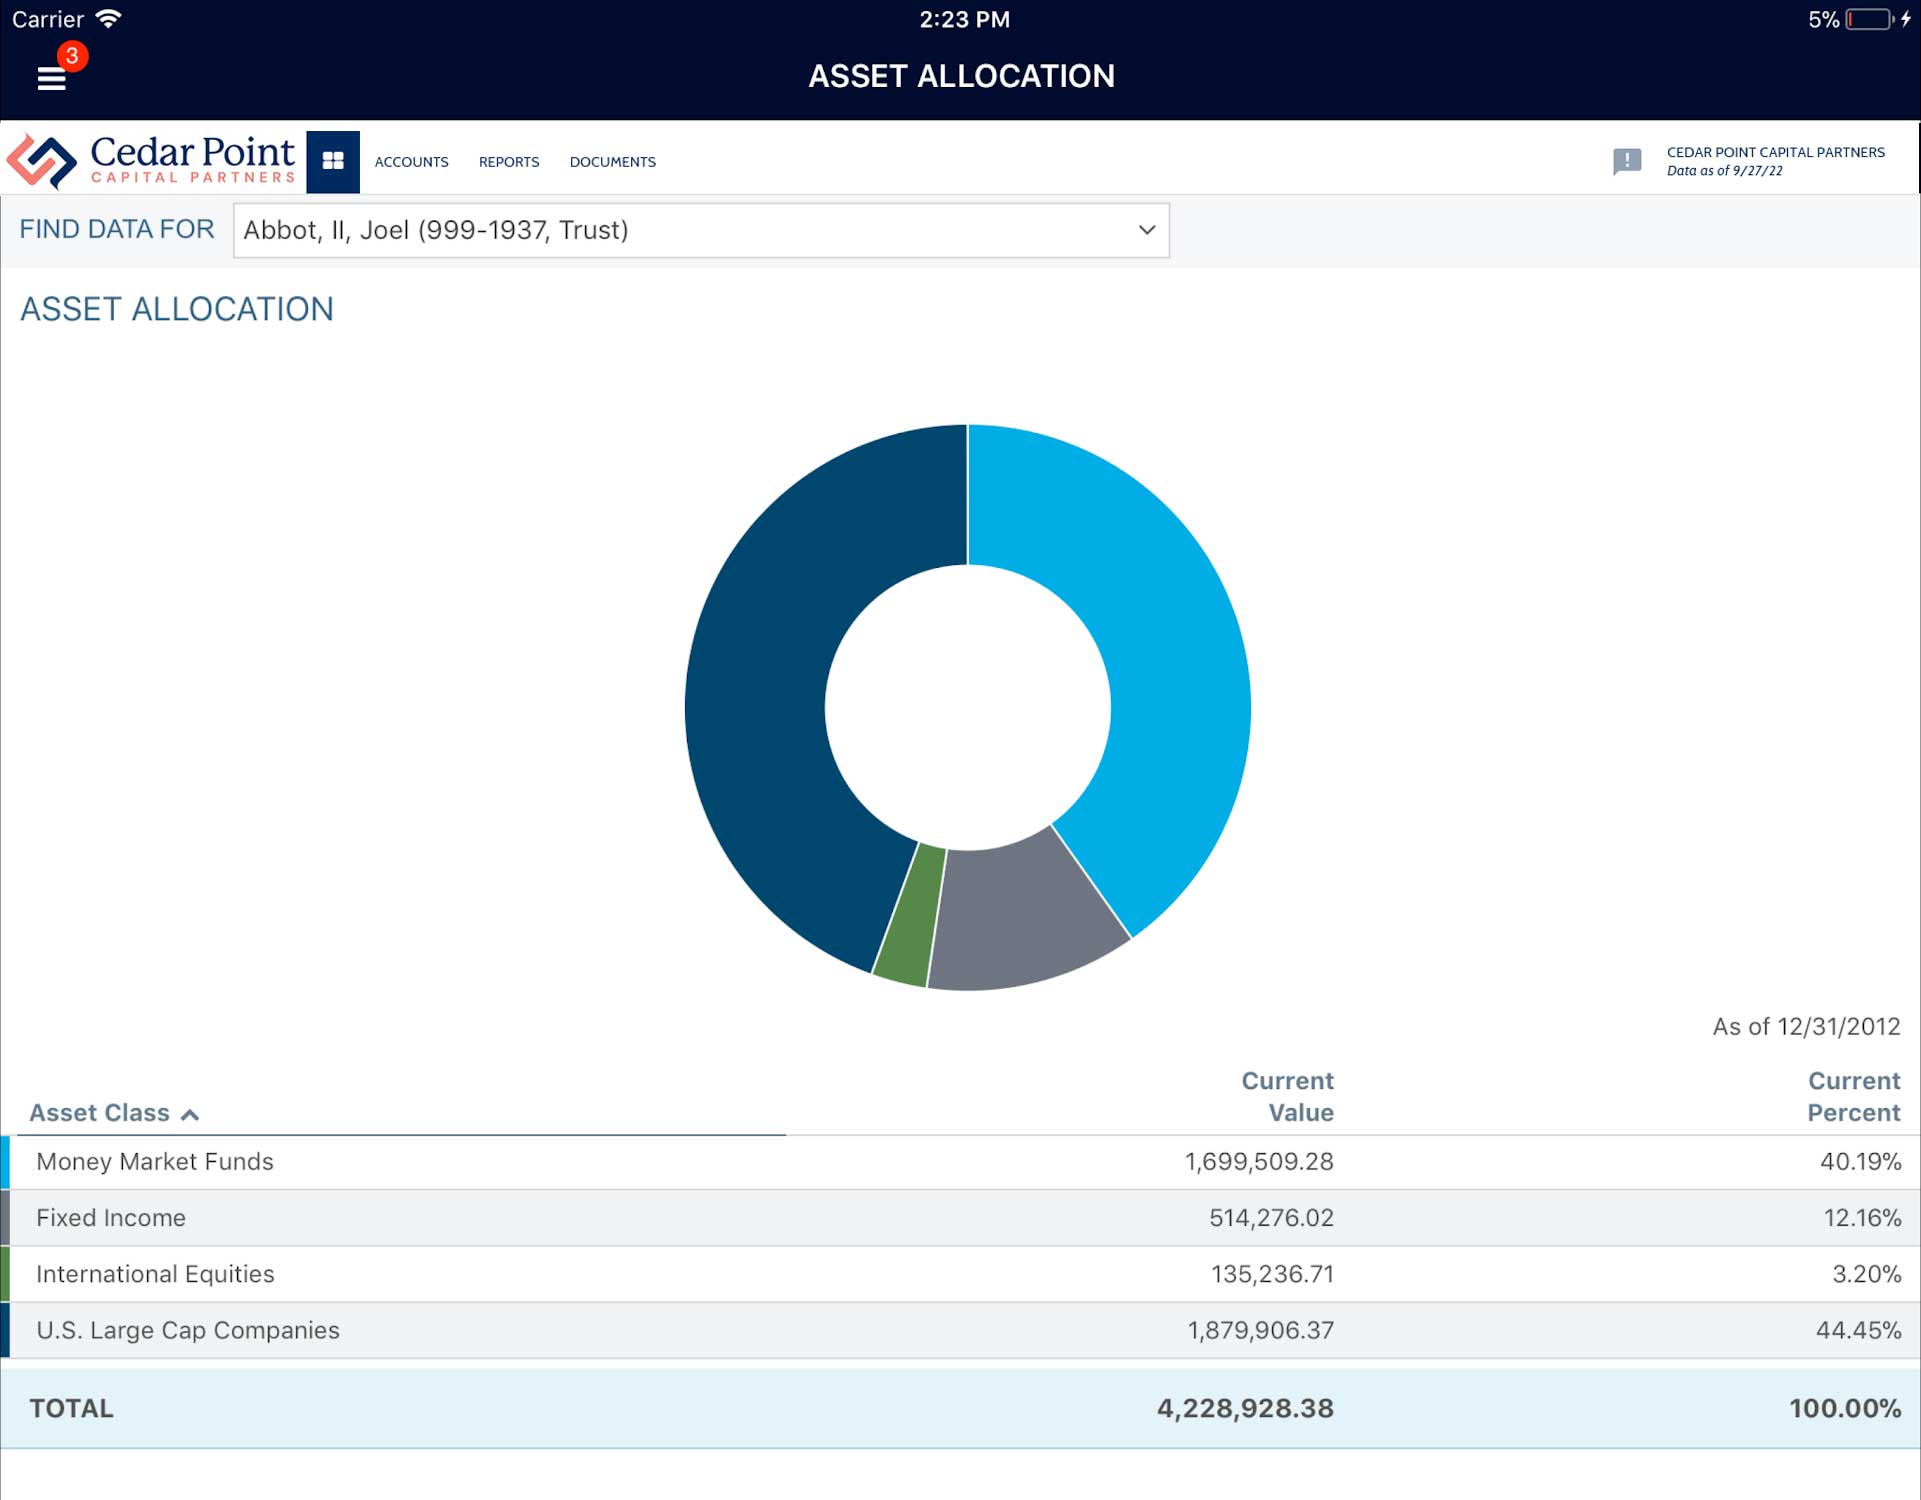 A screenshot of the Asset Allocation report in the Cedar Point Capital Partners app